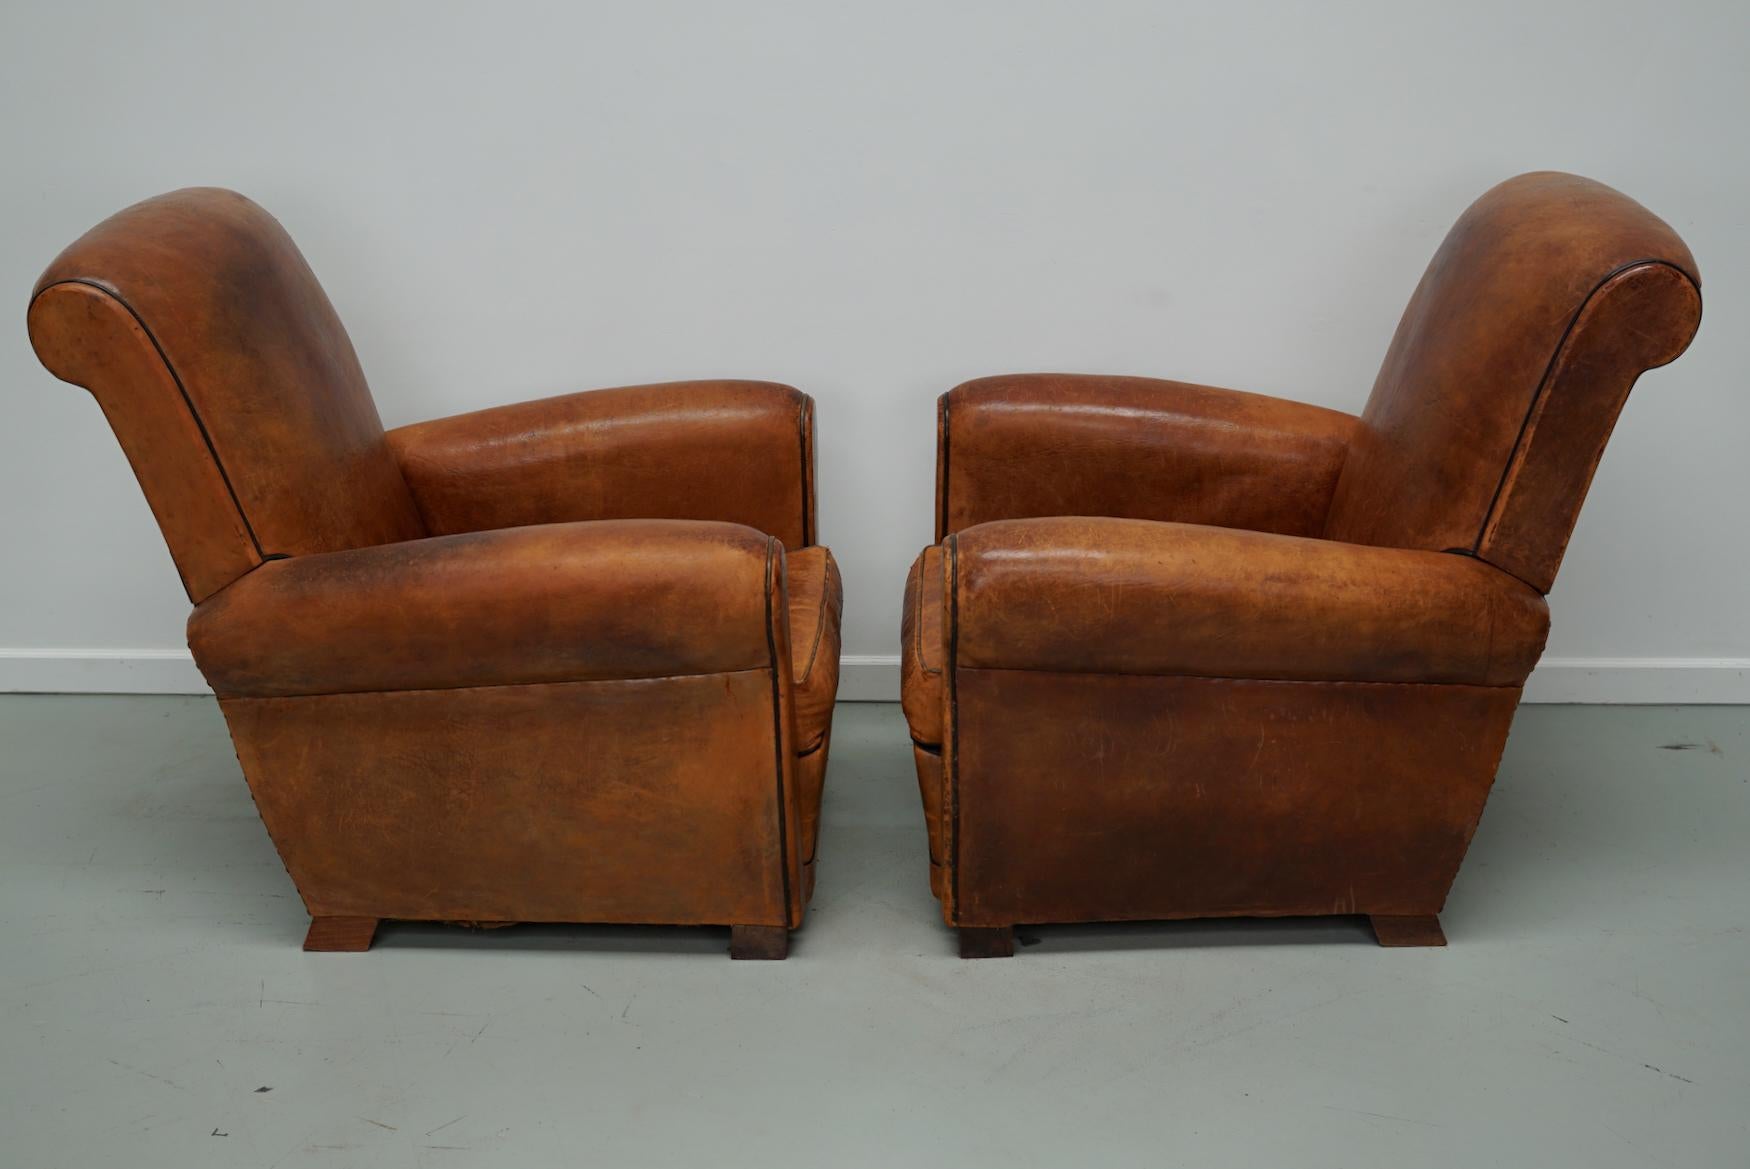  Pair of Vintage French Cognac Leather Club Chairs, Set of 2 3